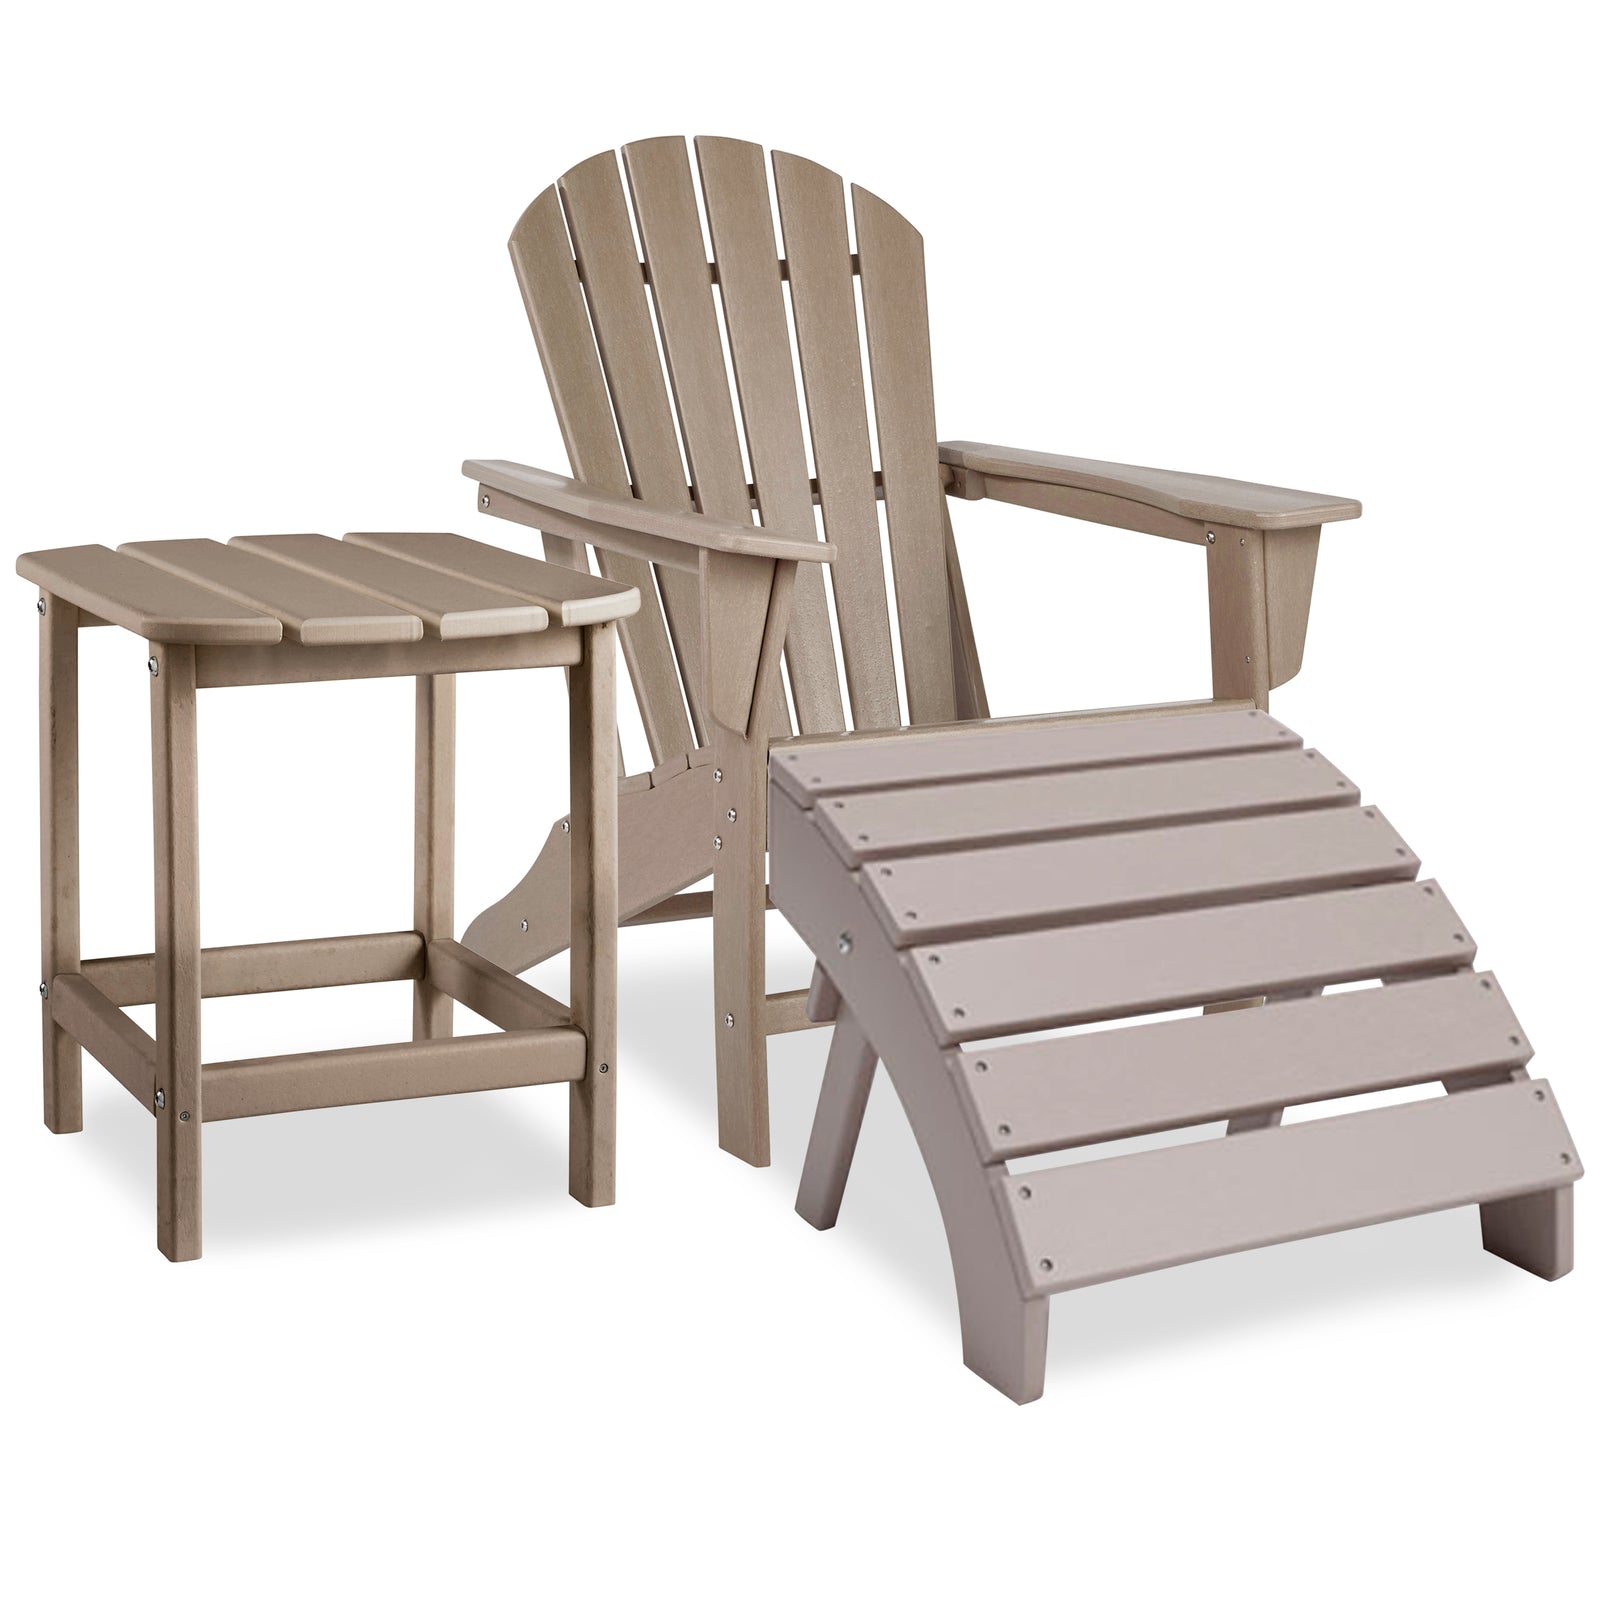 Sundown Driftwood Treasure Outdoor Adirondack Chair And Ottoman With Side Table